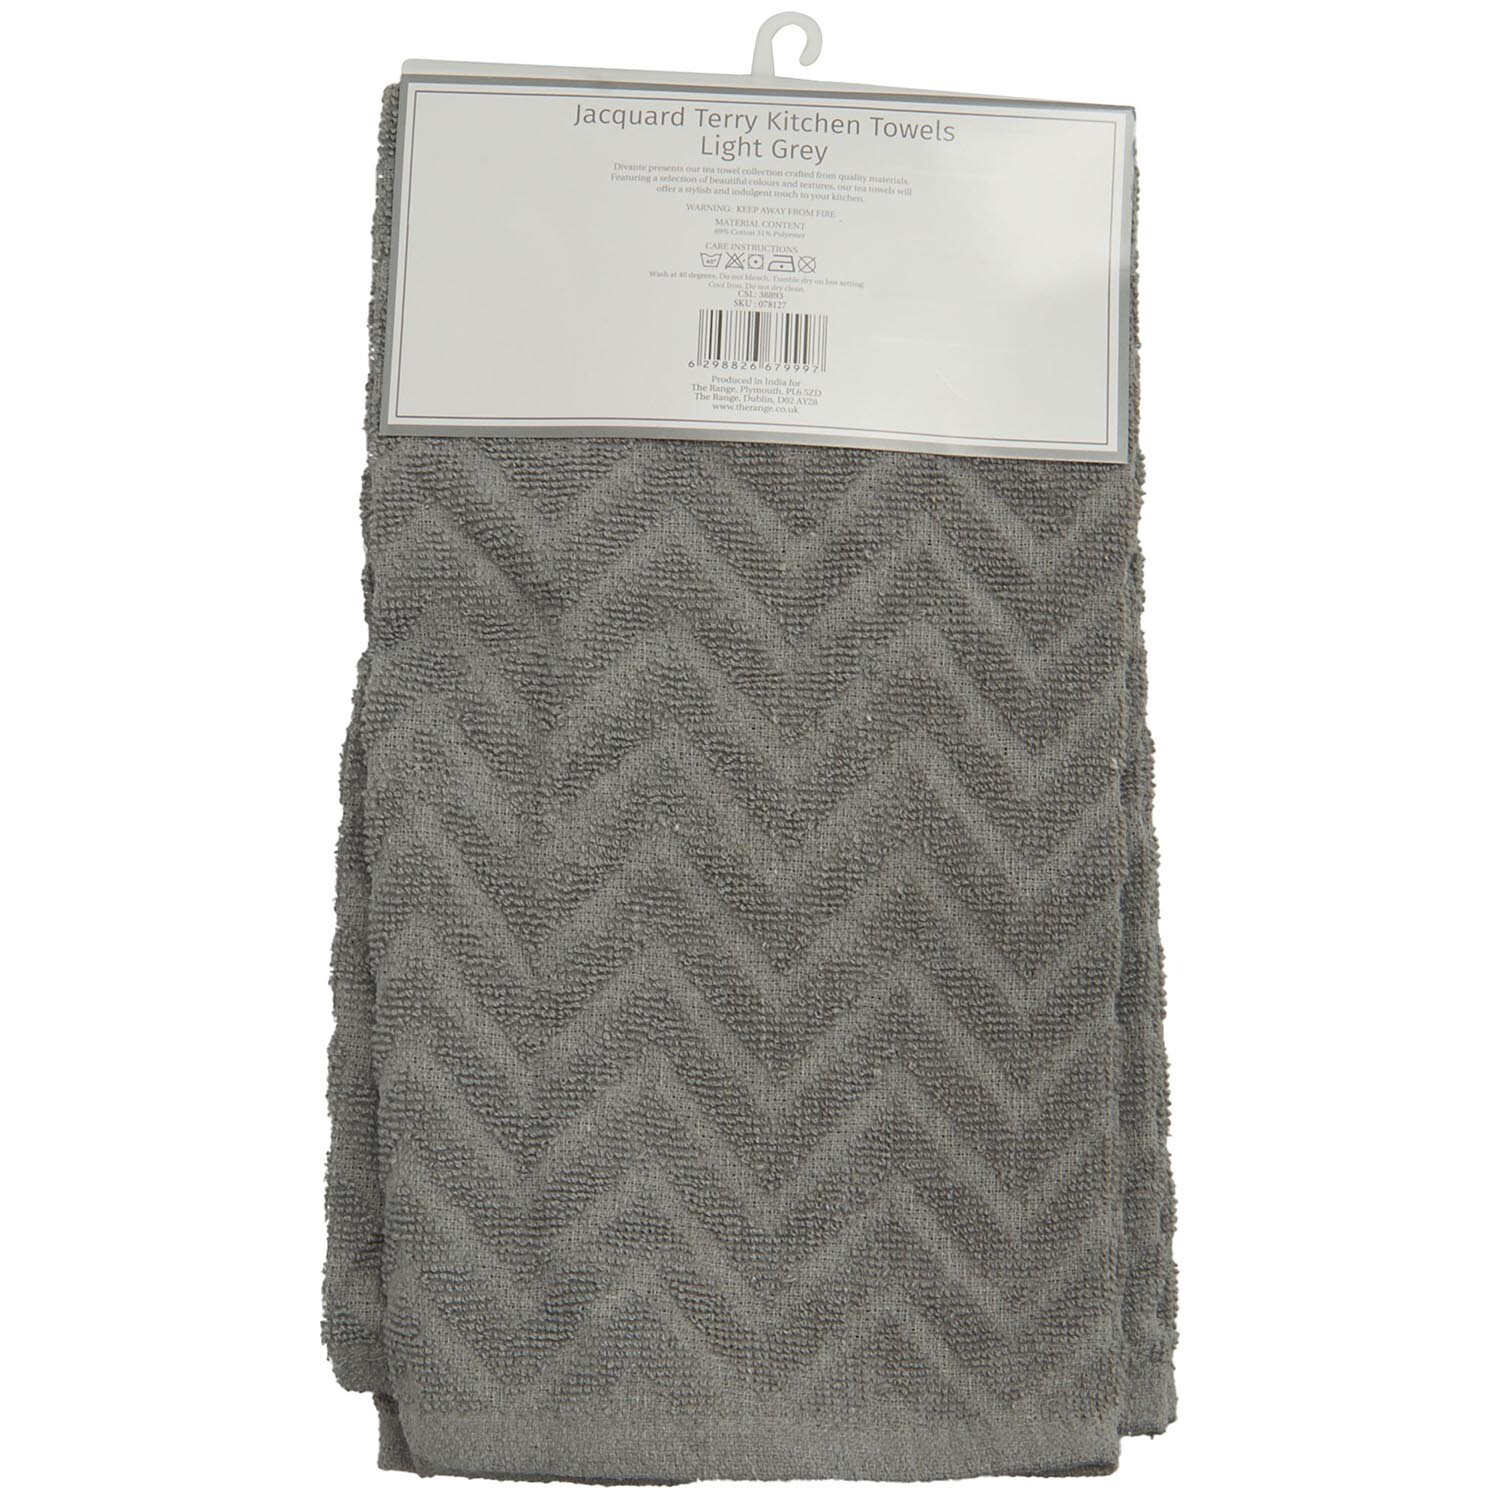 Pack of 2 Jacquard Terry Kitchen Towels - Light Grey | Wilko